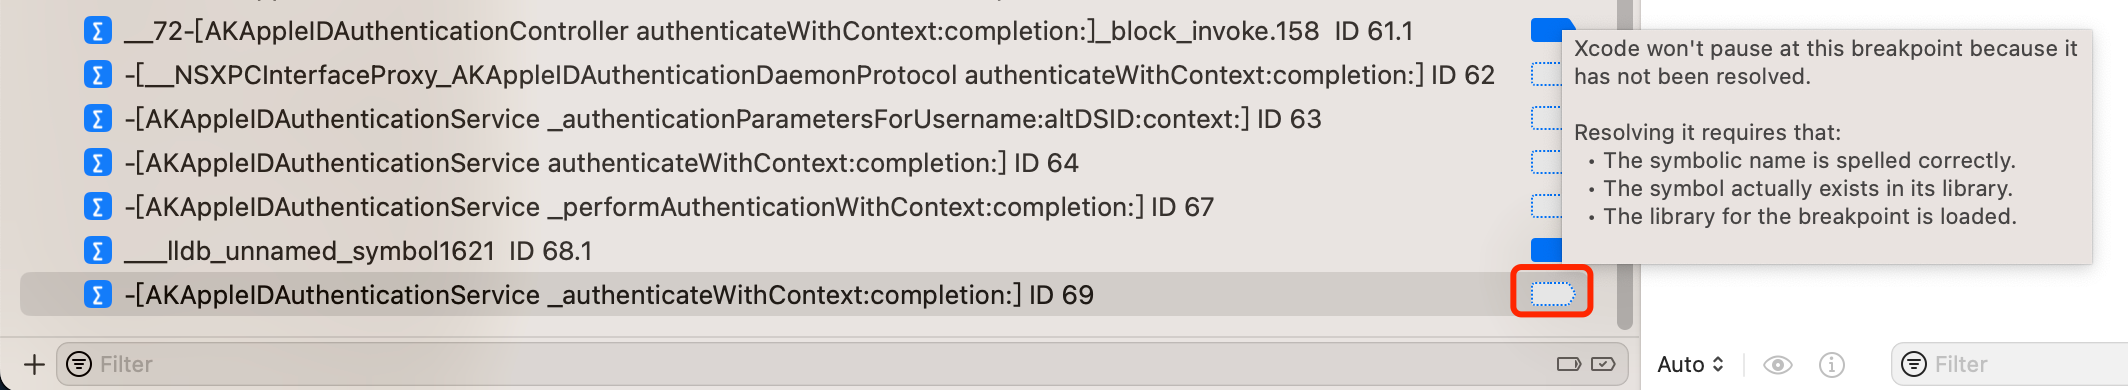 xcode_authenticateWithContext_not_added